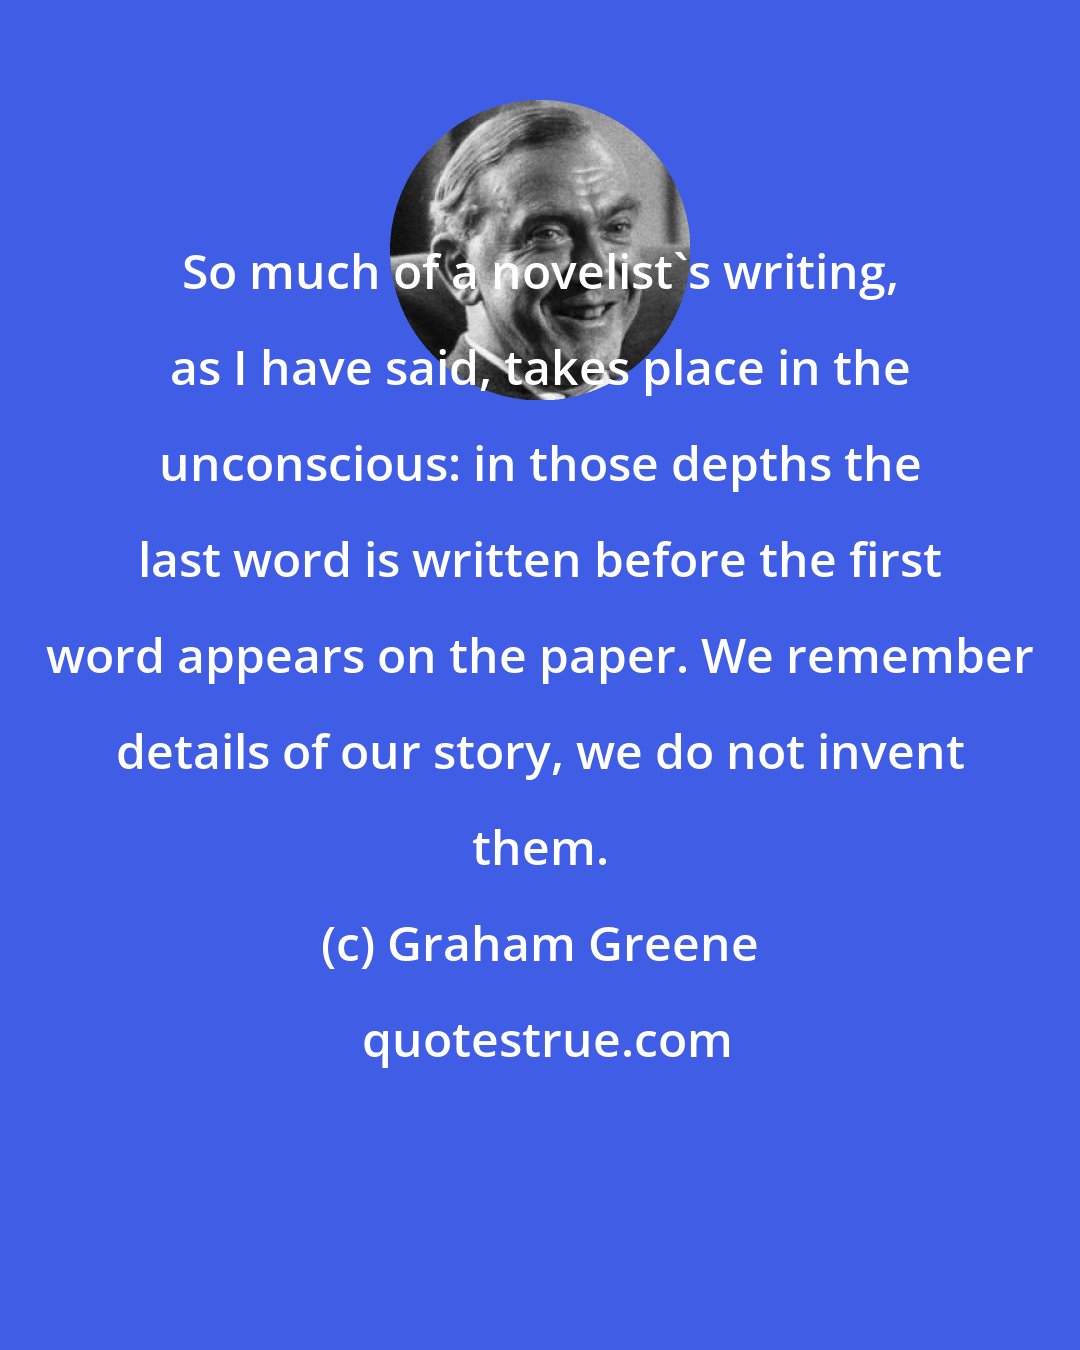 Graham Greene: So much of a novelist's writing, as I have said, takes place in the unconscious: in those depths the last word is written before the first word appears on the paper. We remember details of our story, we do not invent them.